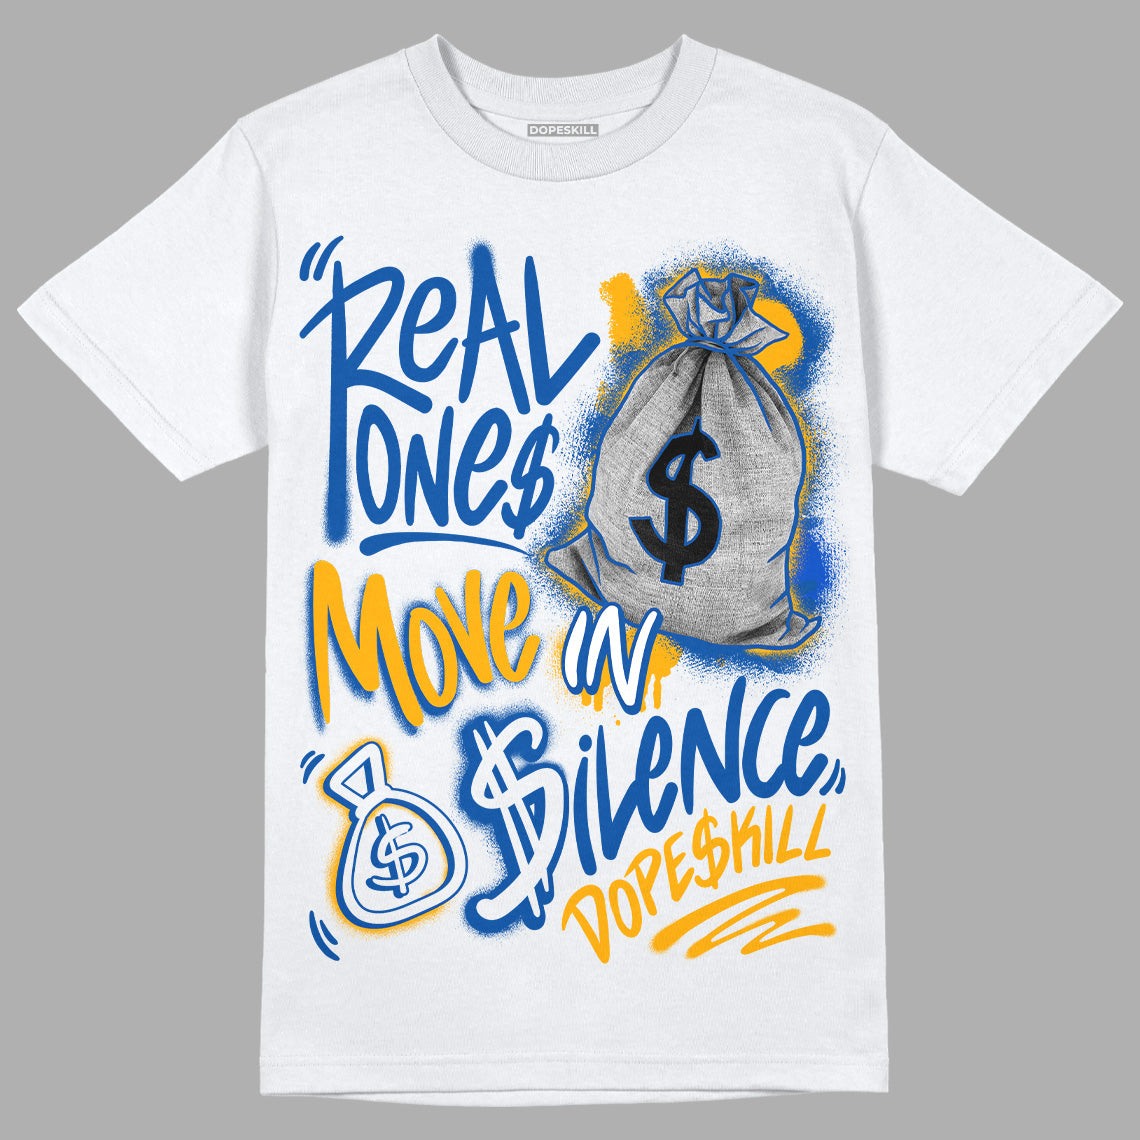 Dunk Blue Jay and University Gold DopeSkill T-Shirt Real Ones Move In Silence Graphic Streetwear - White 